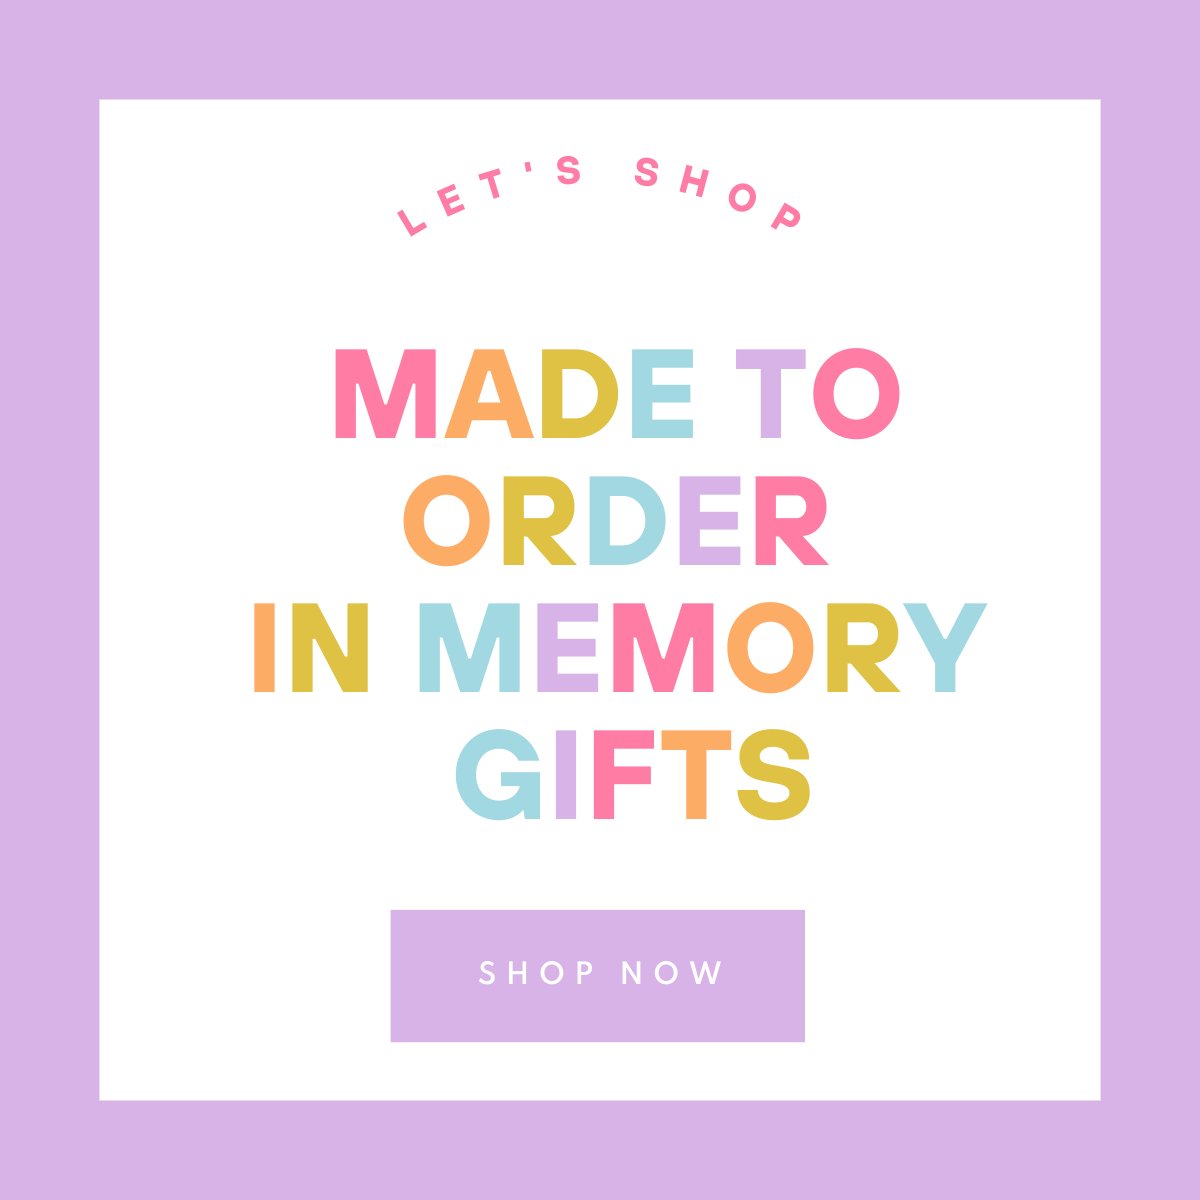 Made-To-Order In Memory Gifts